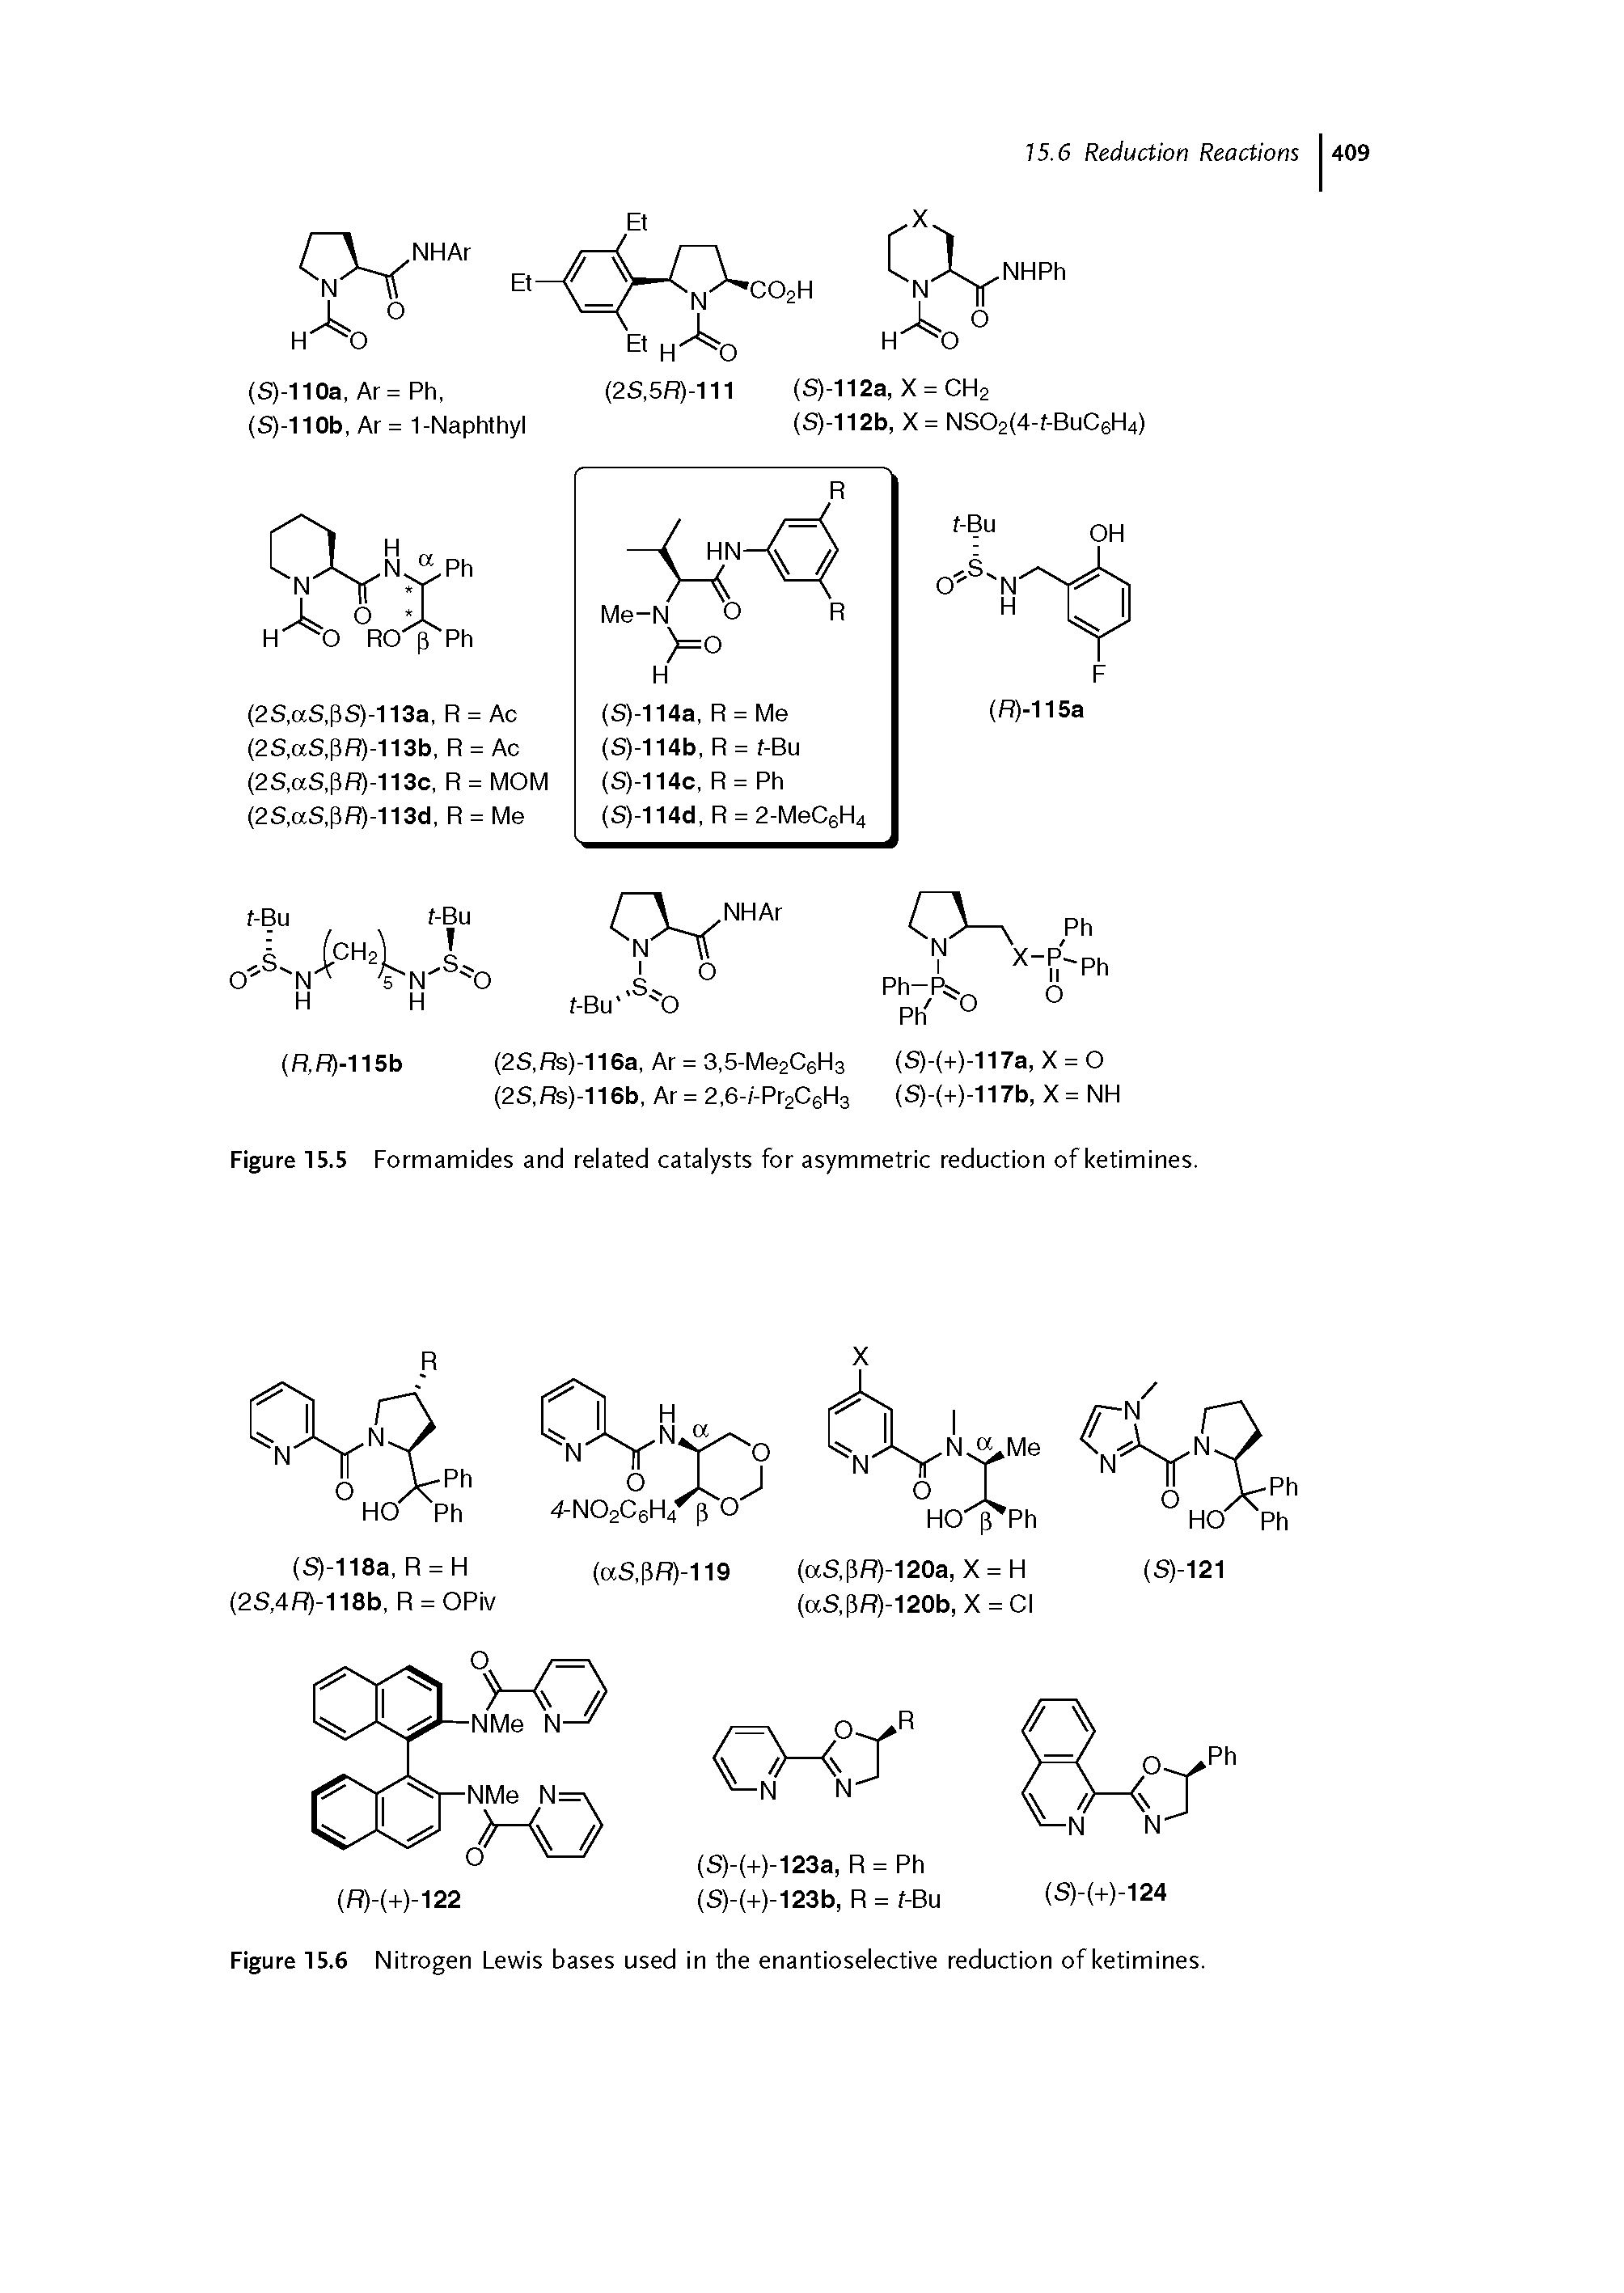 Figure 15.6 Nitrogen Lewis bases used in the enantioselective reduction of ketimines.